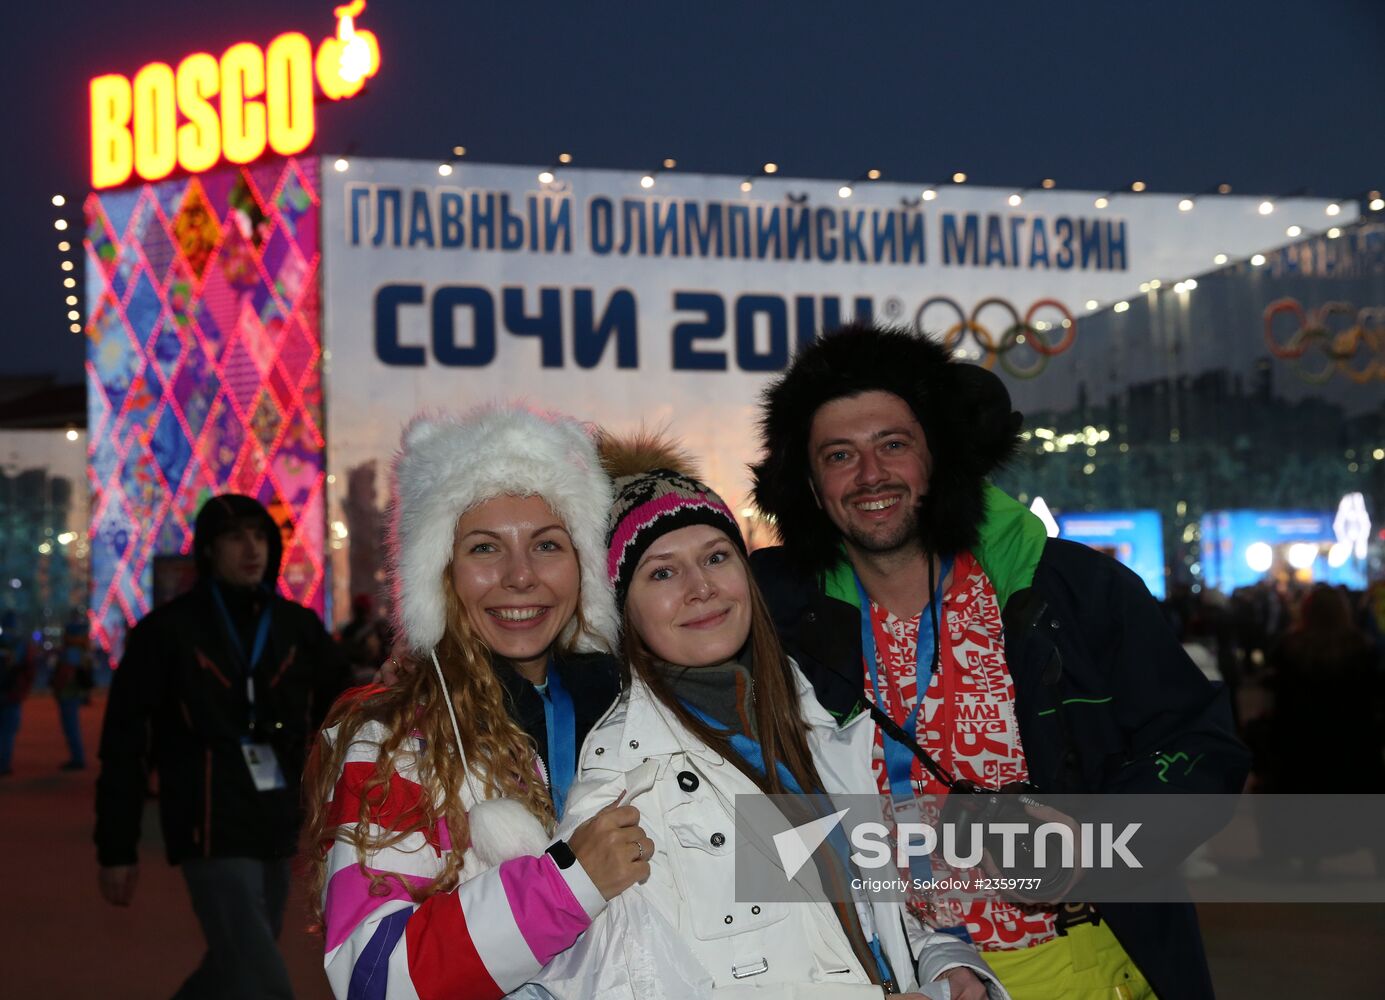 Spectators arrive at the open ceremony of the 2014 Winter Olympics